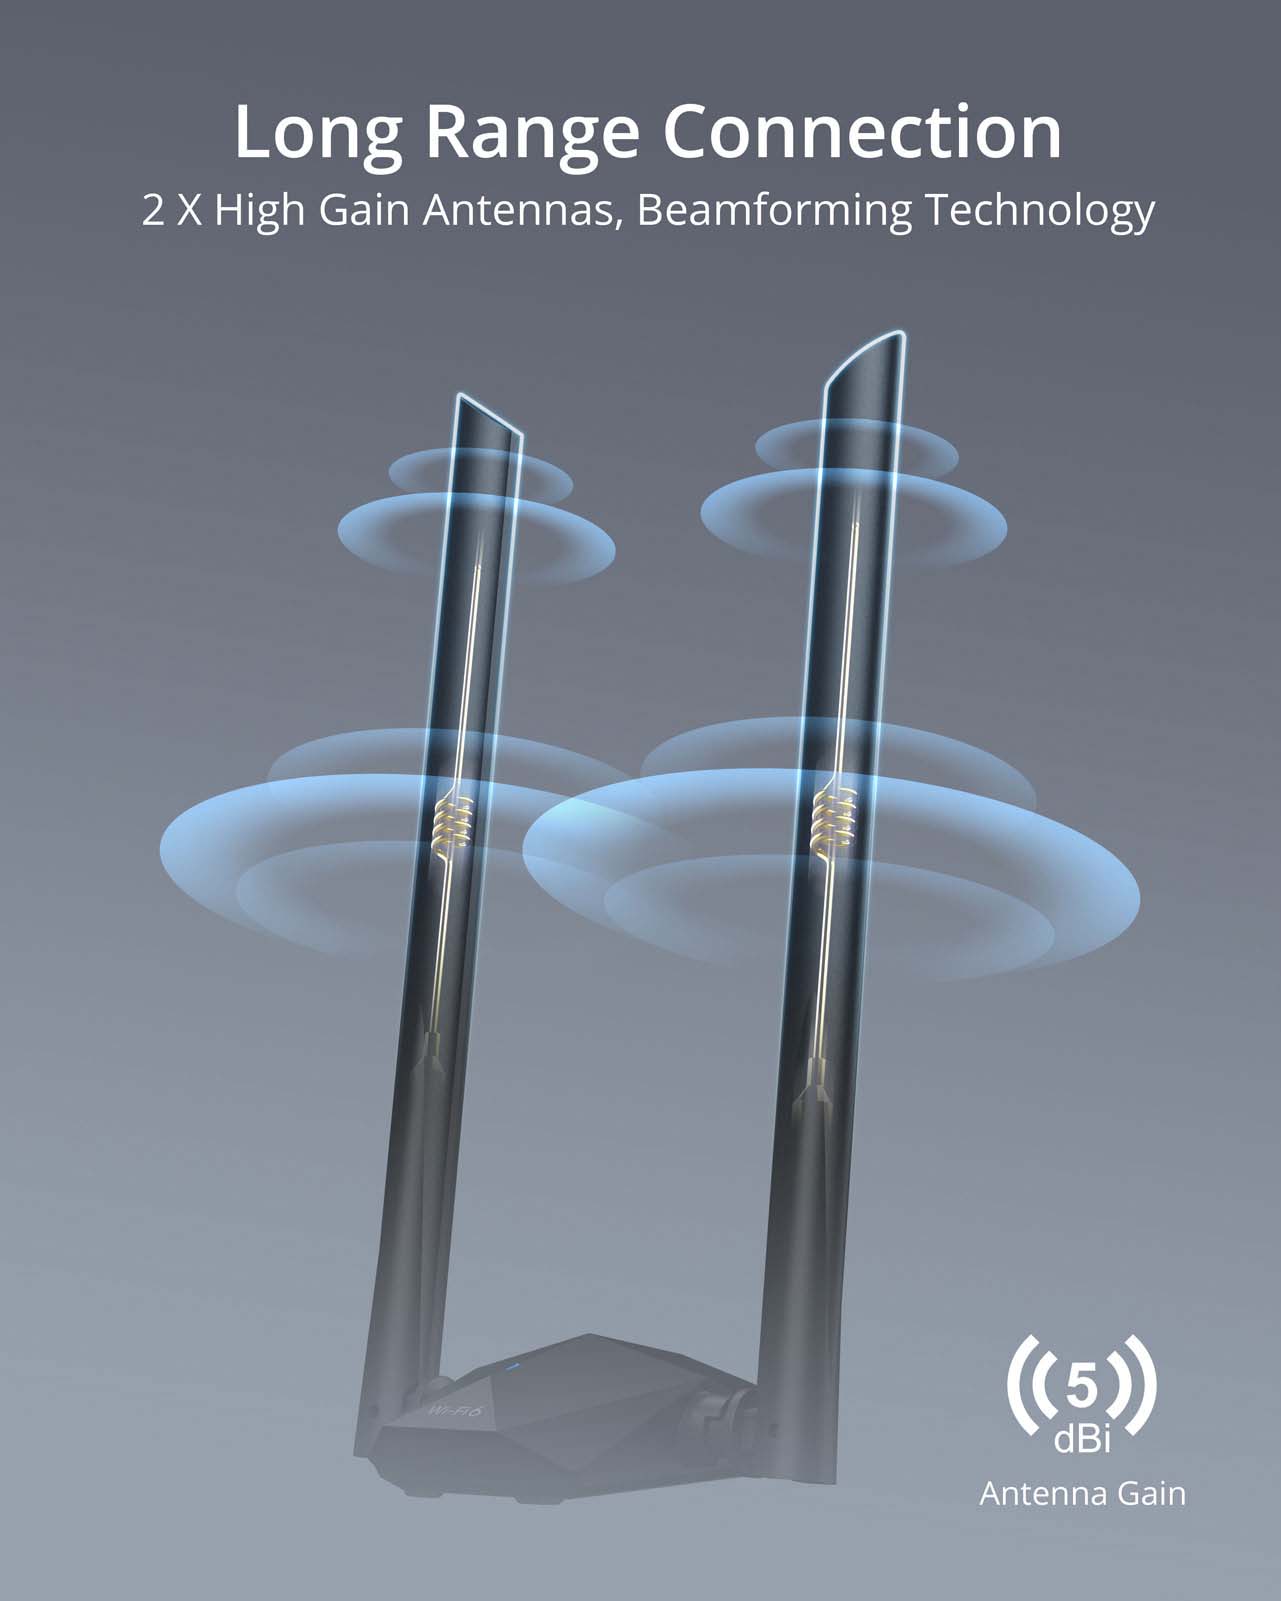 Two 5dBi high gain antennas with Beamforming technology ensure stronger signal reception